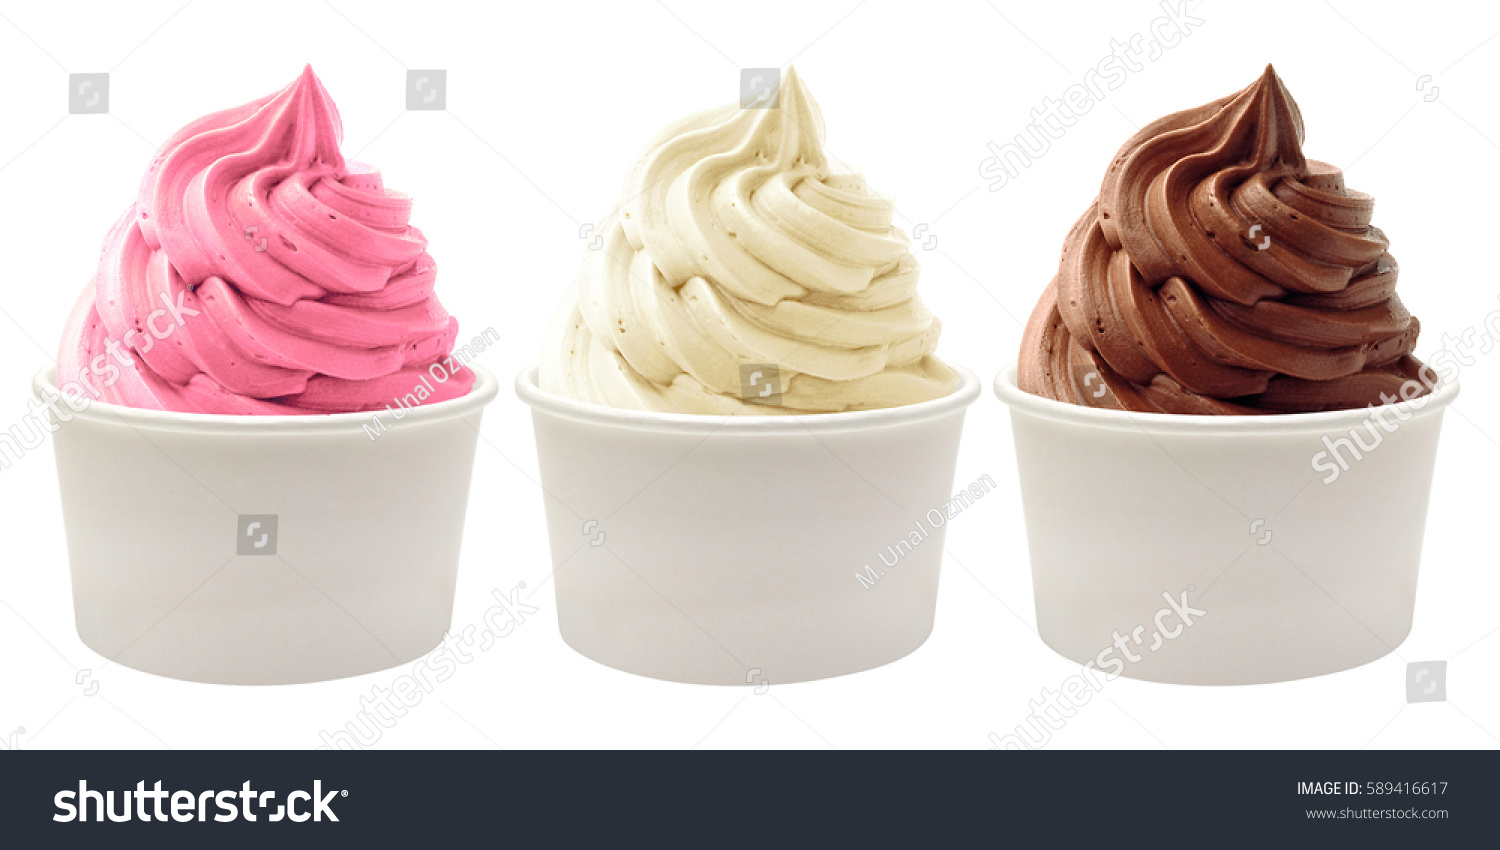 Mockup Strawberry frozen yogurt or soft ice cream, vanilla and chocolate frozen yogurt or soft ice cream in blank paper cup packaging template mockup collection with isolated background #589416617